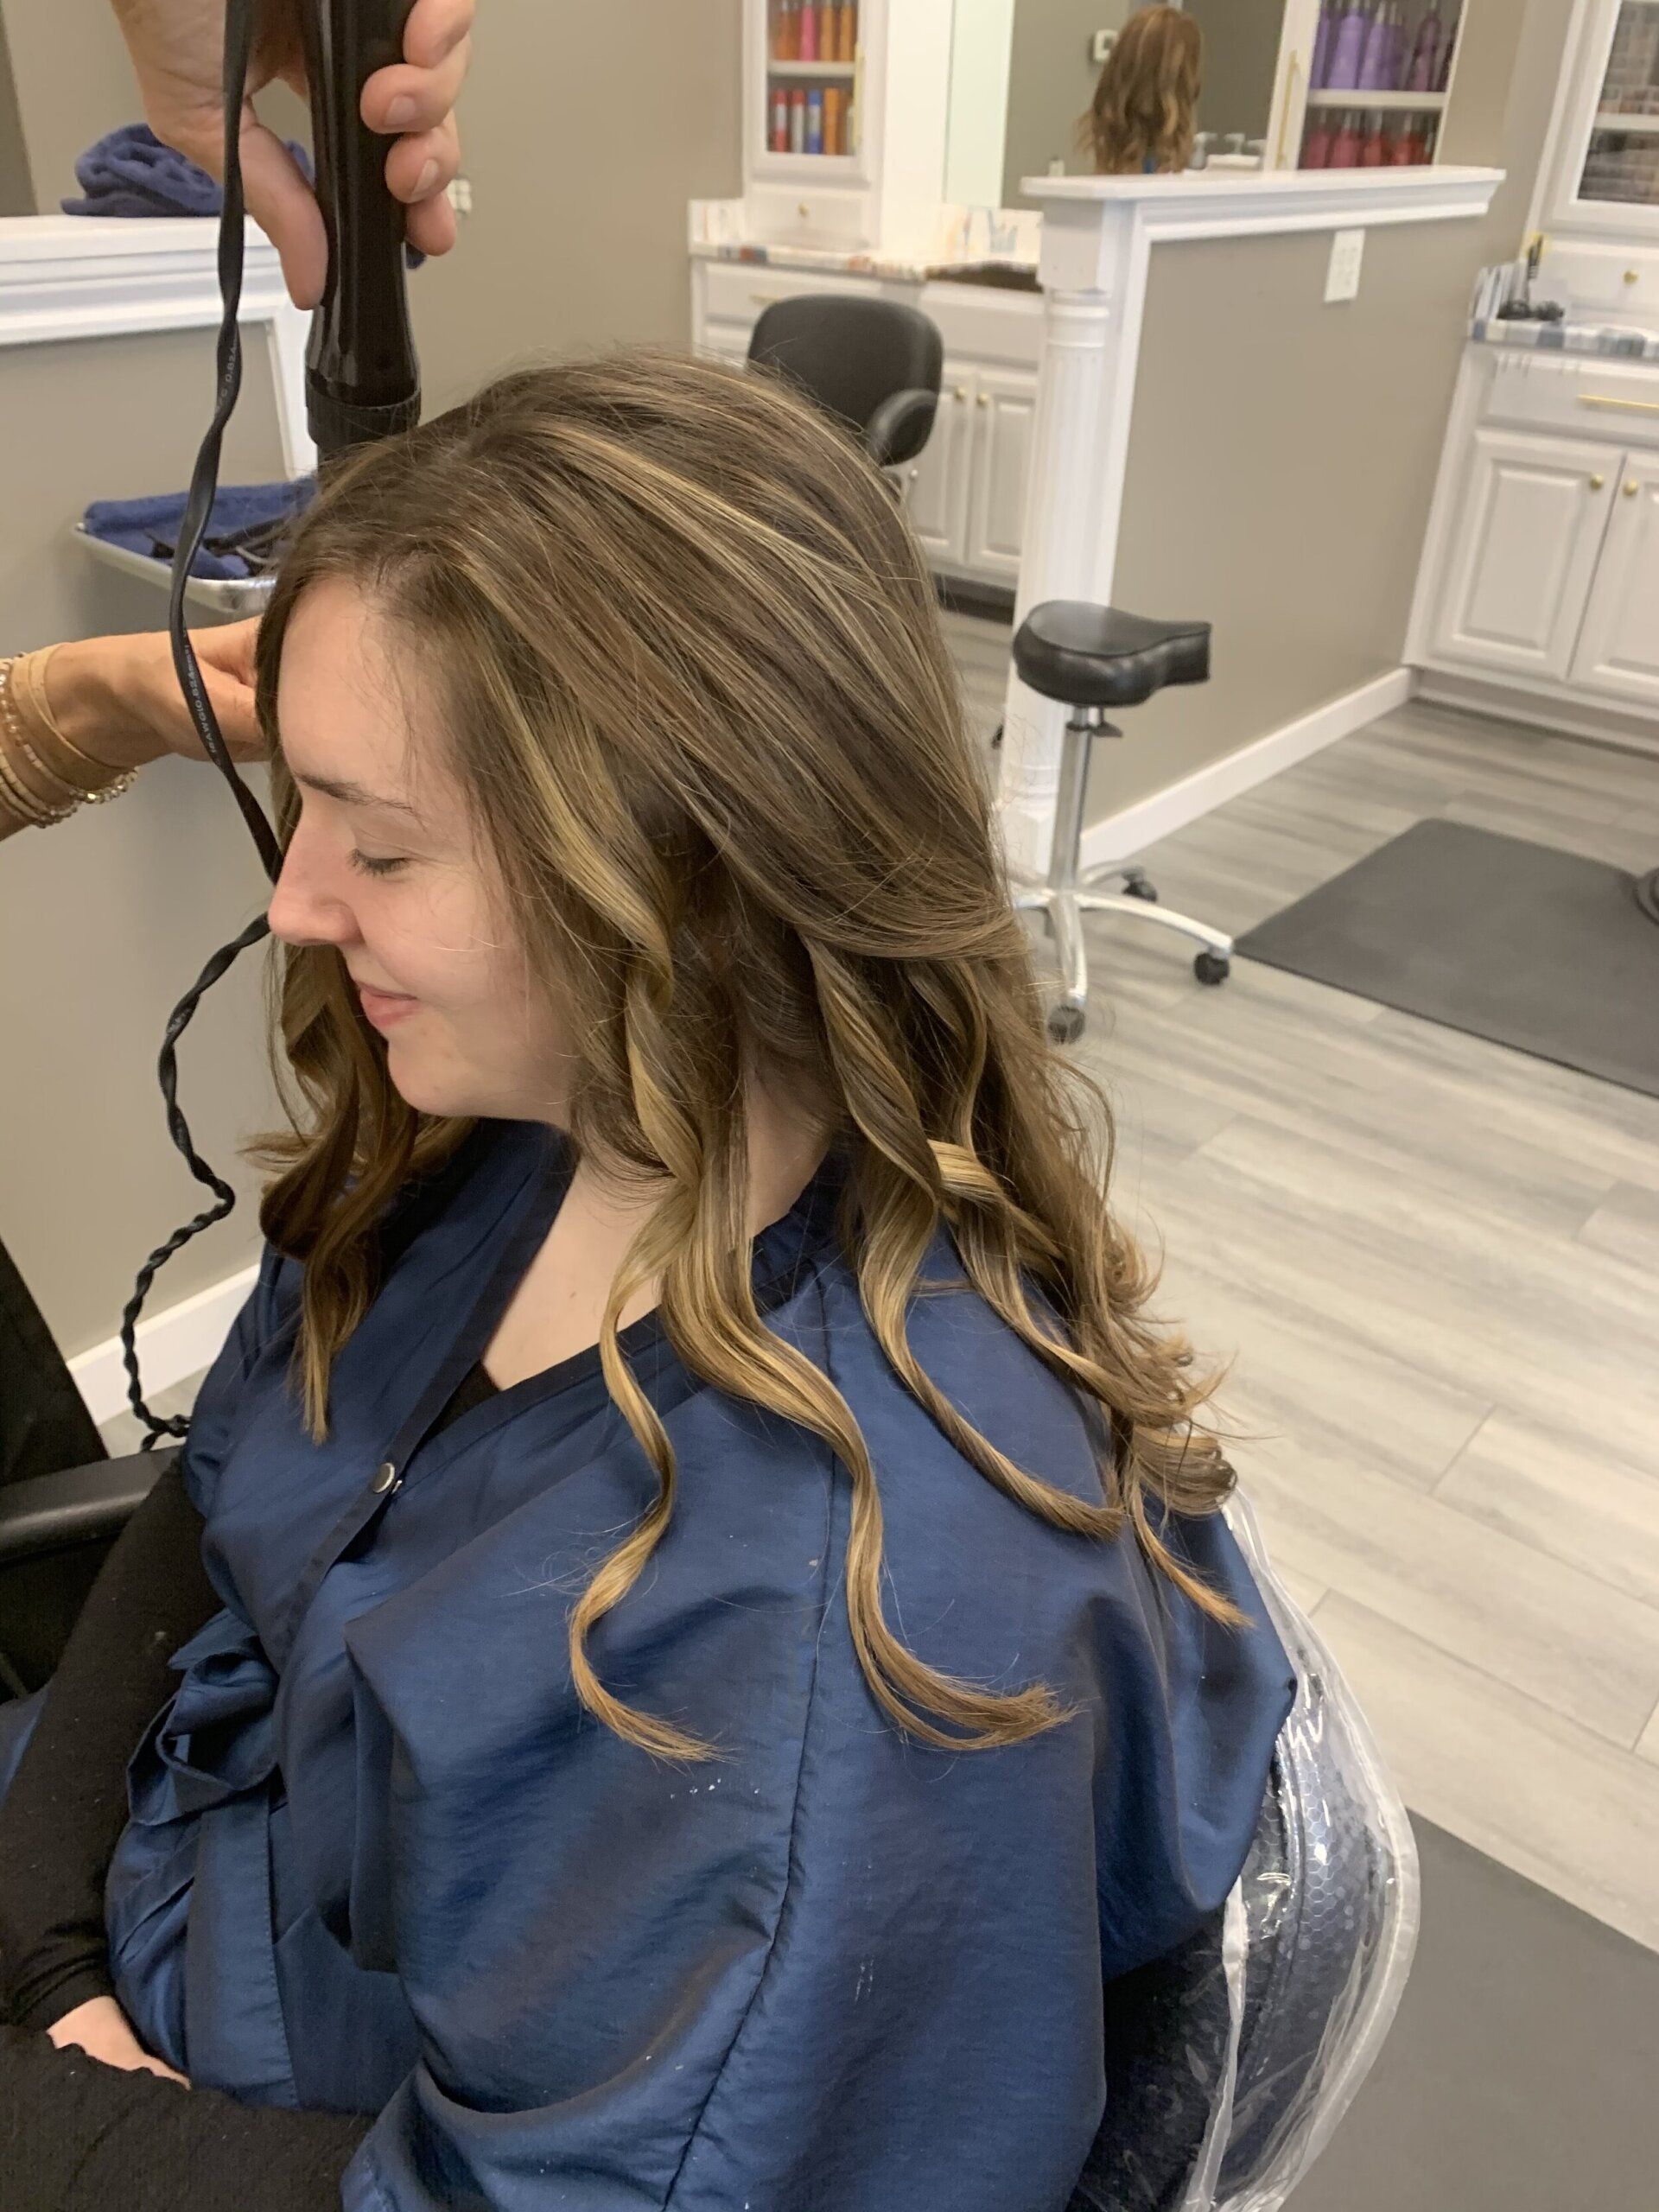 About a week after her long layer haircut & style Gianna came back for Balayage. A full head of Balayage on Virgin Hair. Here are the Balayage results and photos.